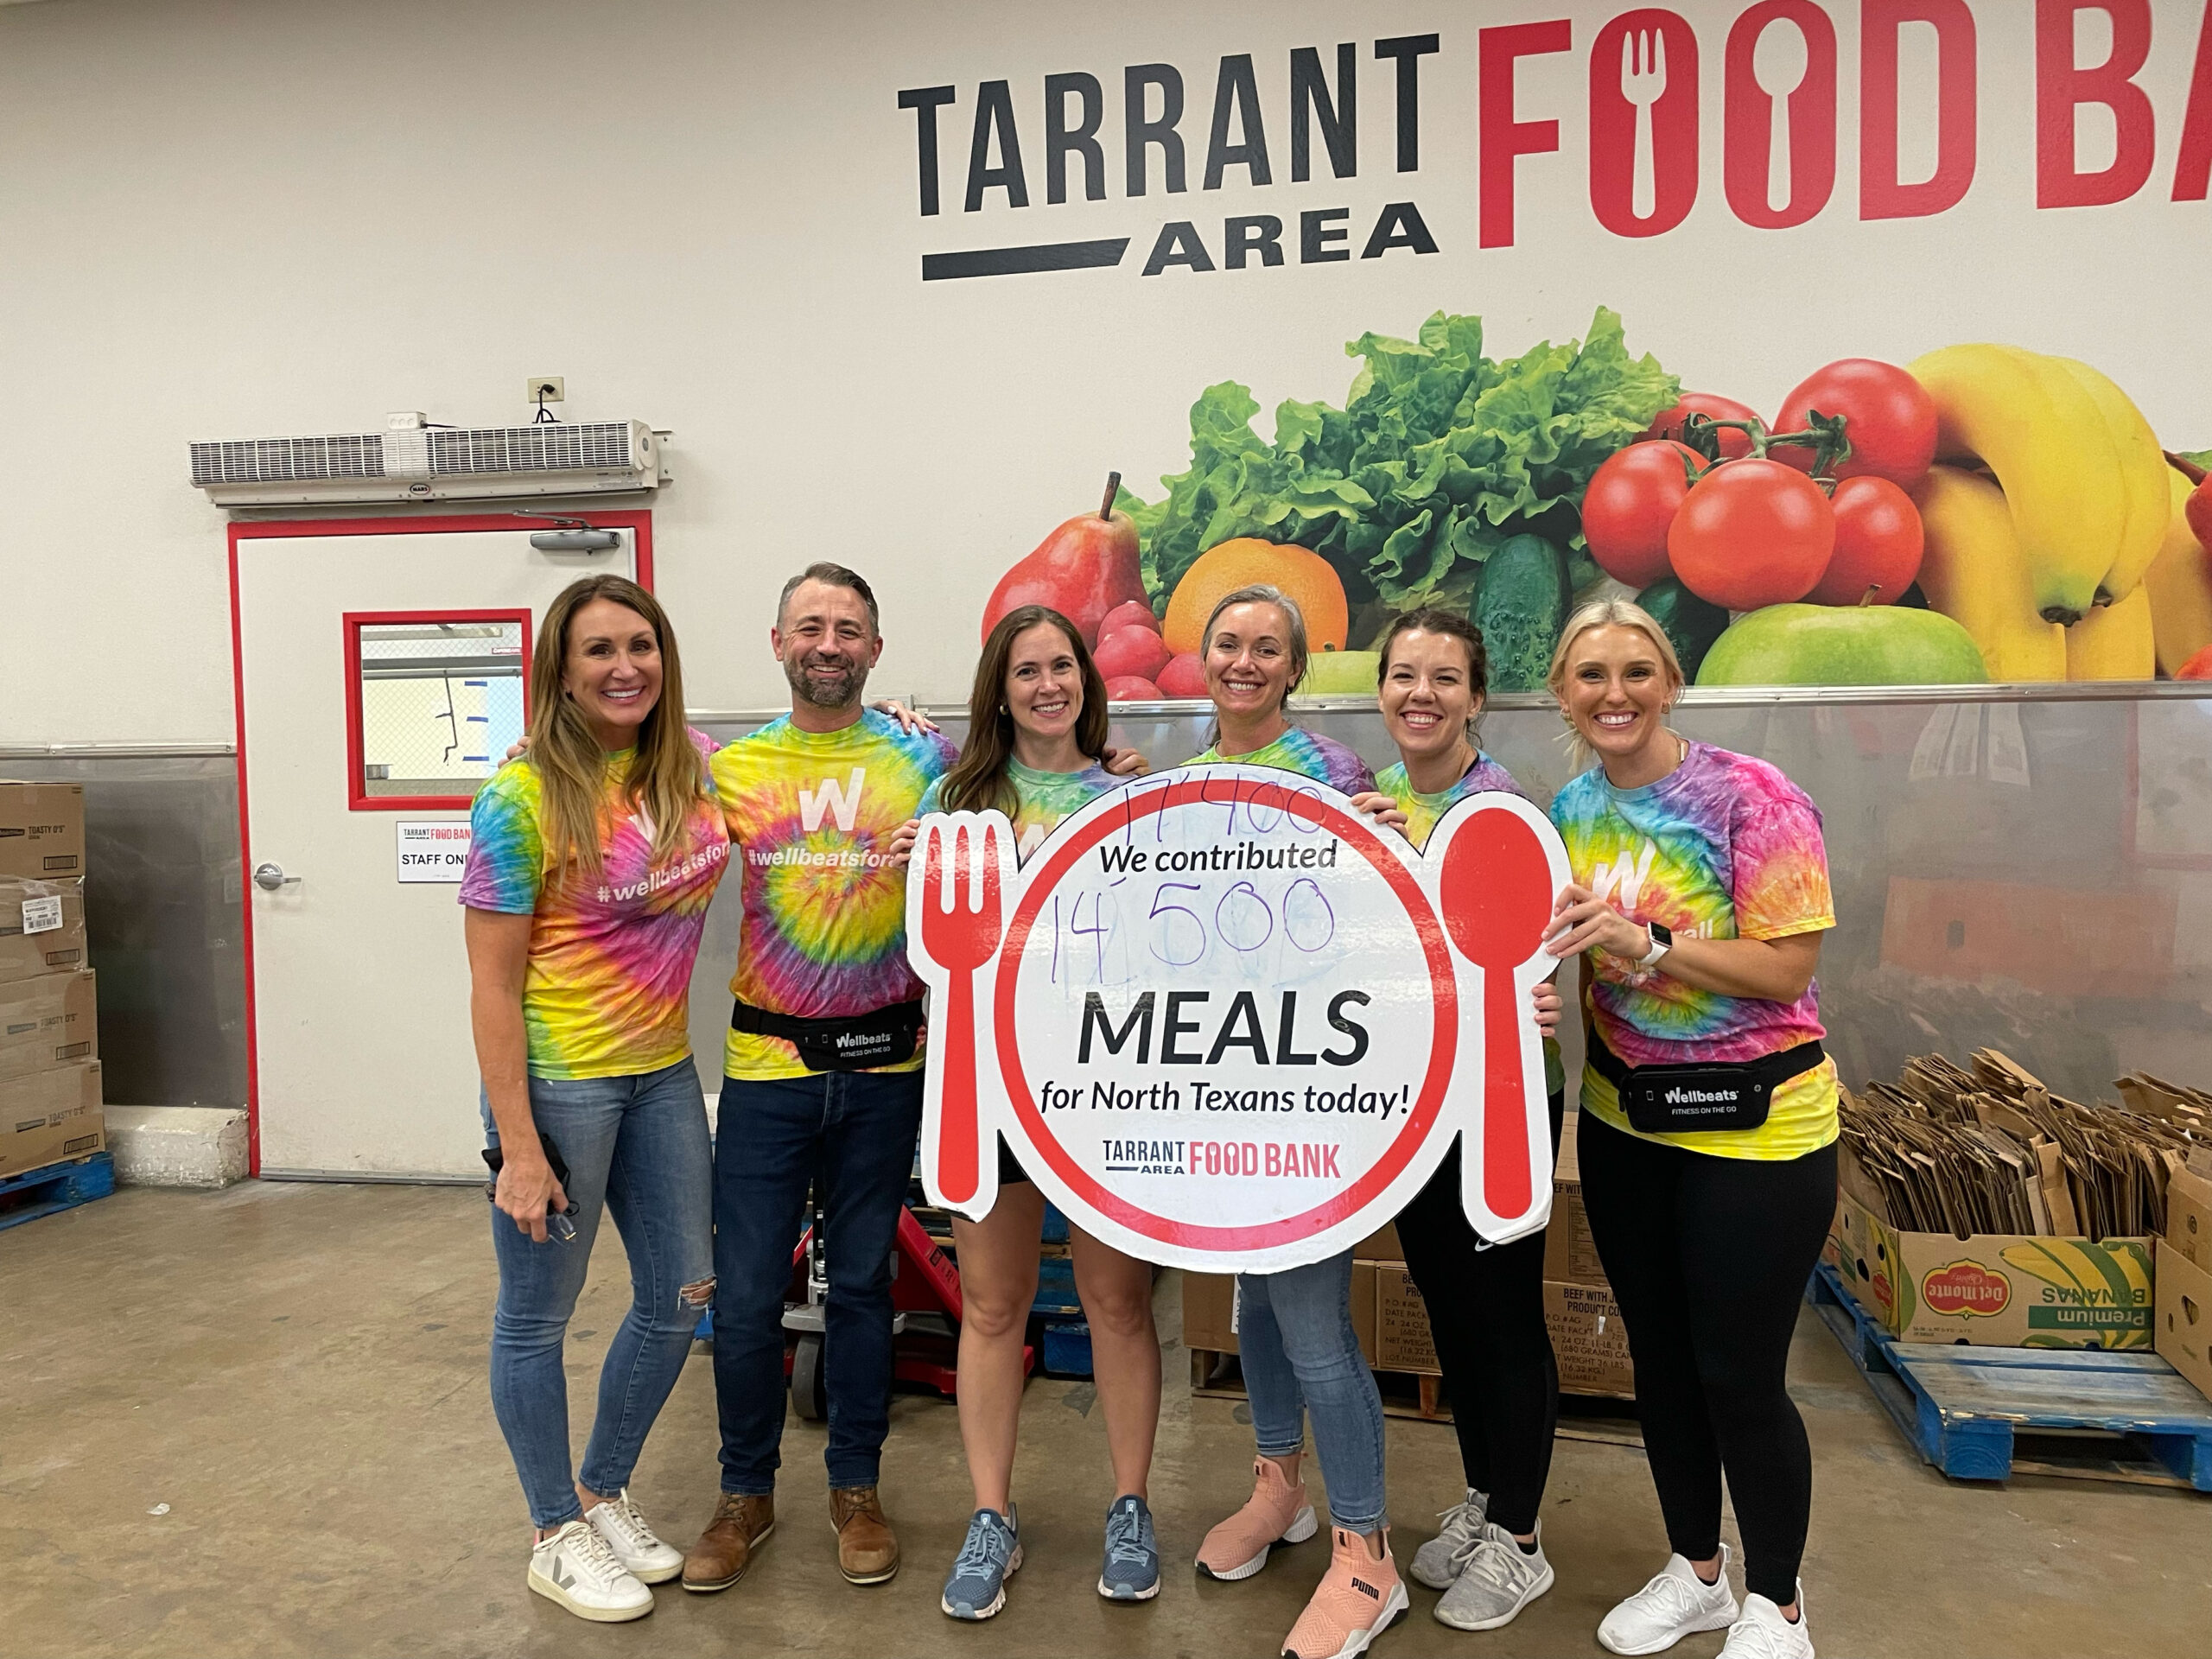 Members of the Wellbeats team pose together at the Tarrant Area Food Bank